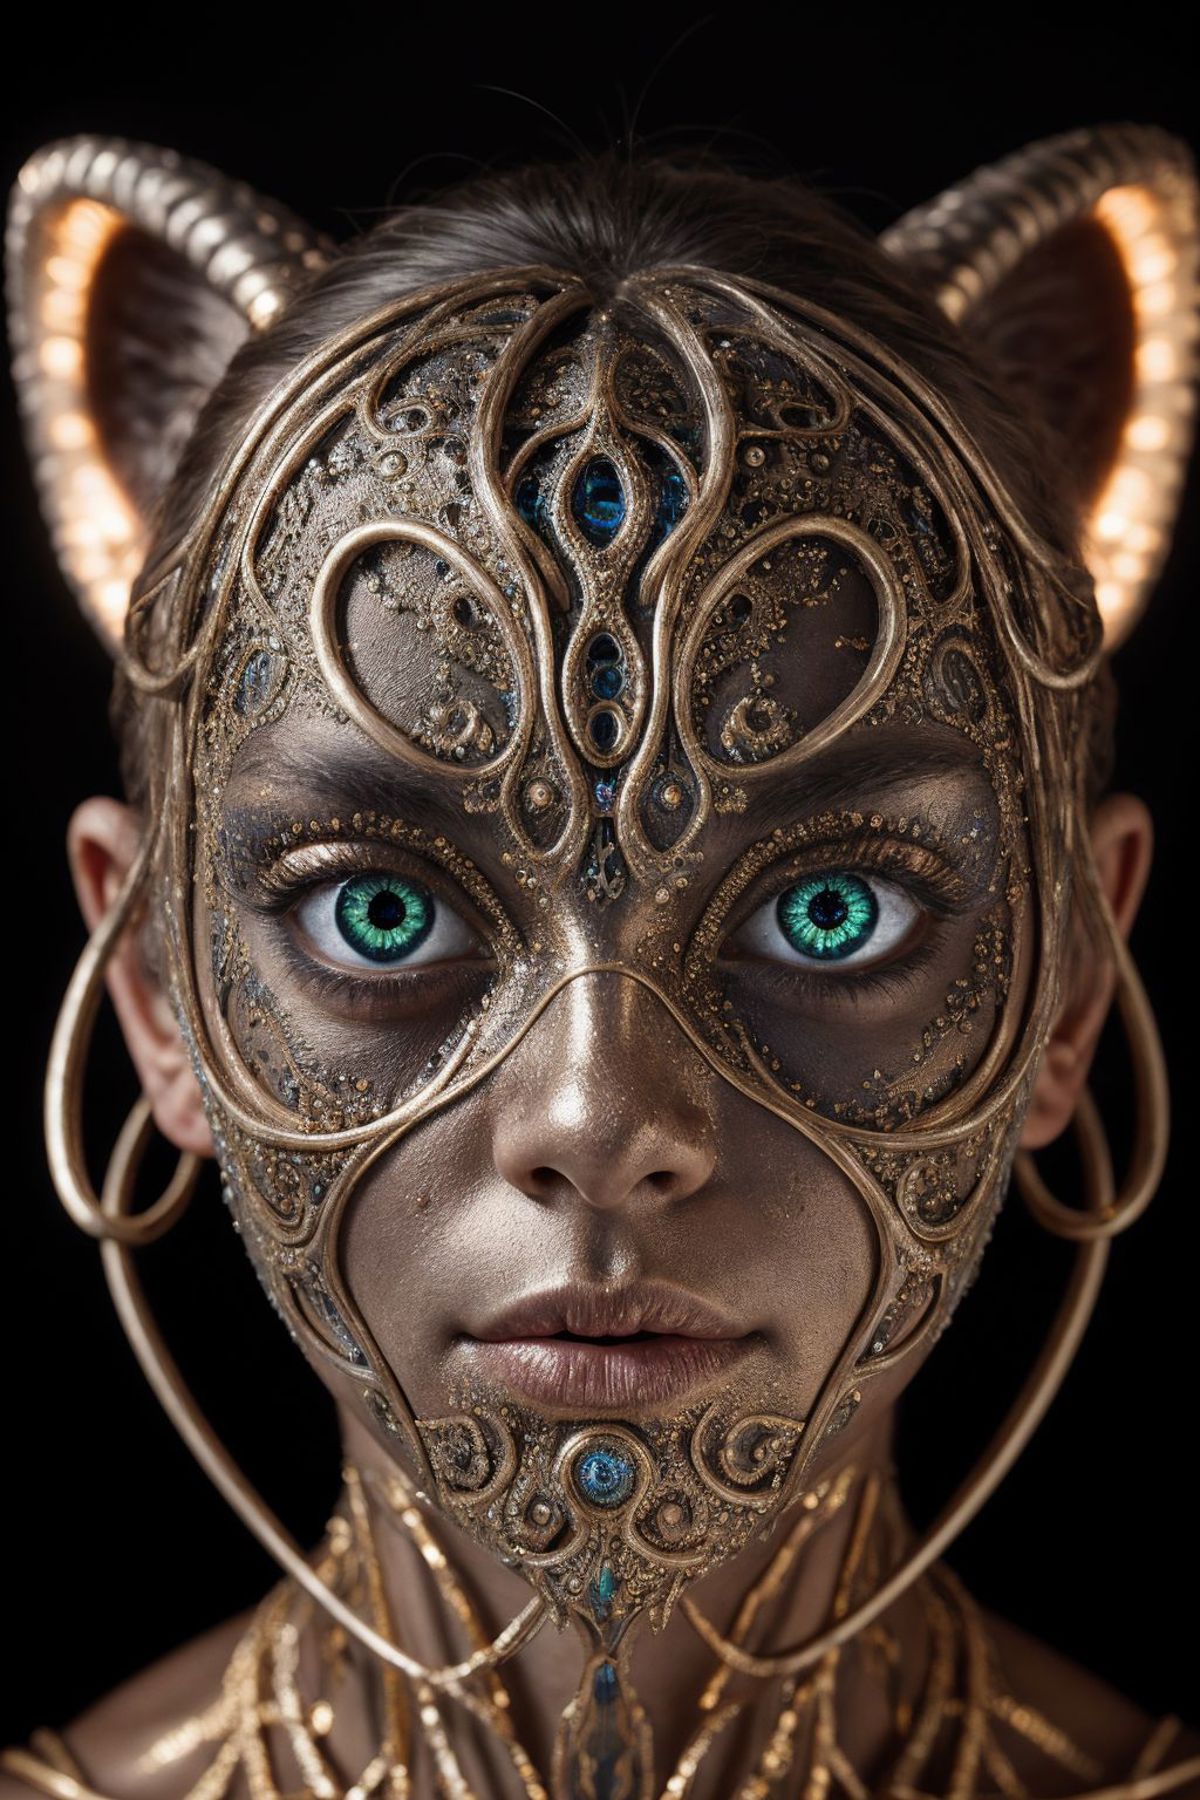 A woman with blue eyes wearing a gold and silver mask.